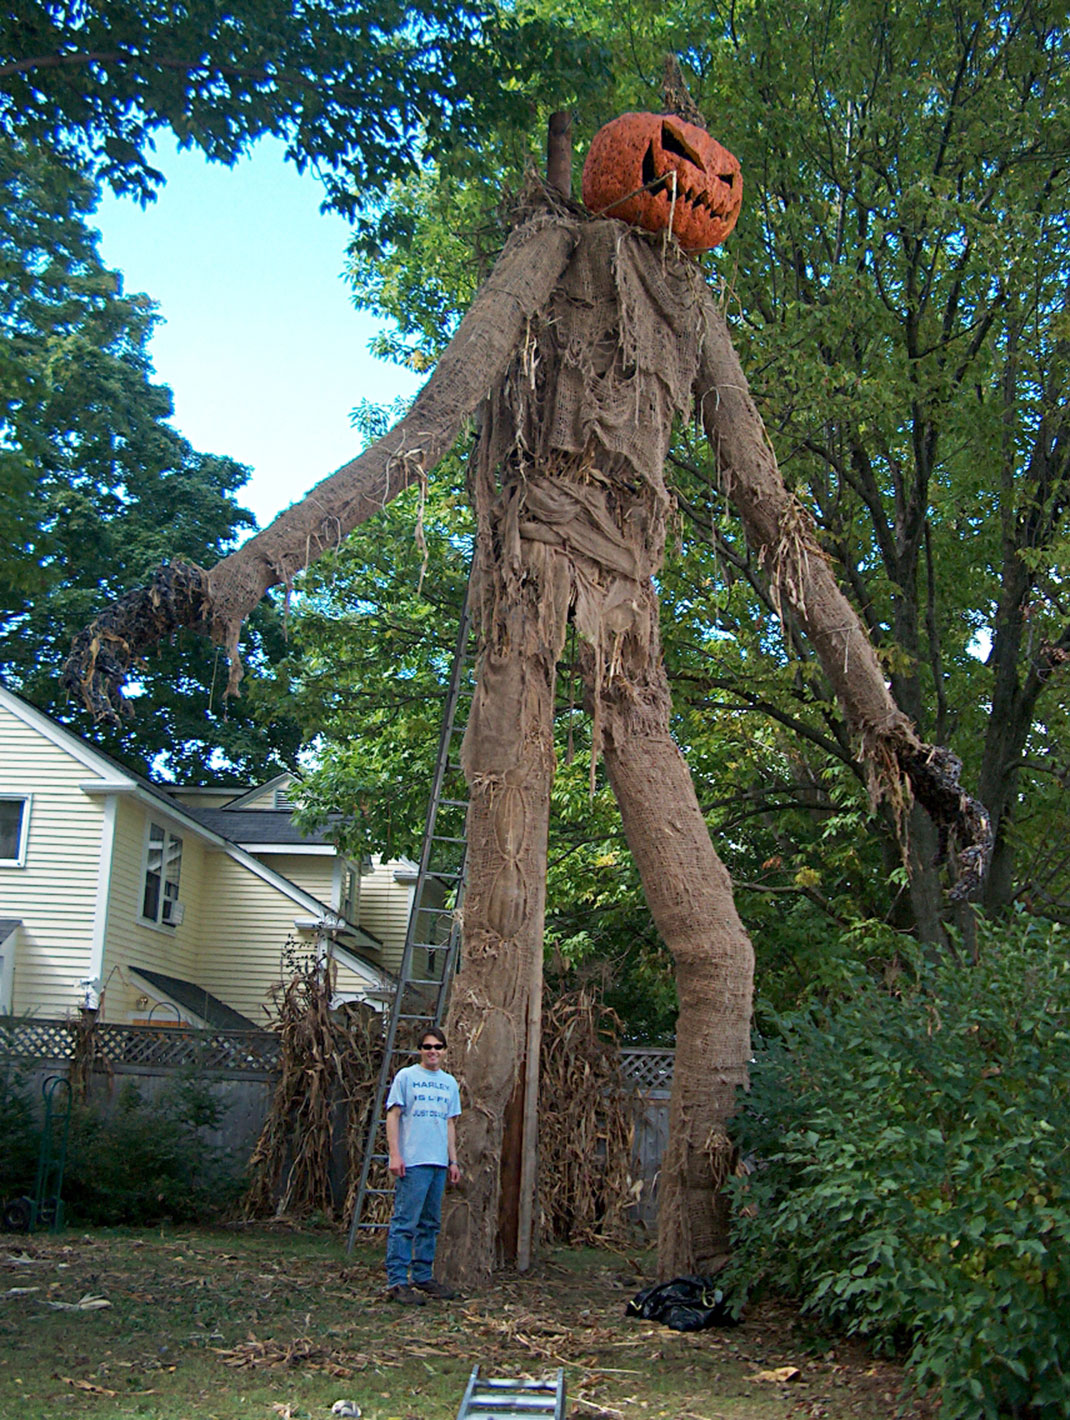 These Halloween Decorations Convert Homes Into Real Horror Meuseums-5